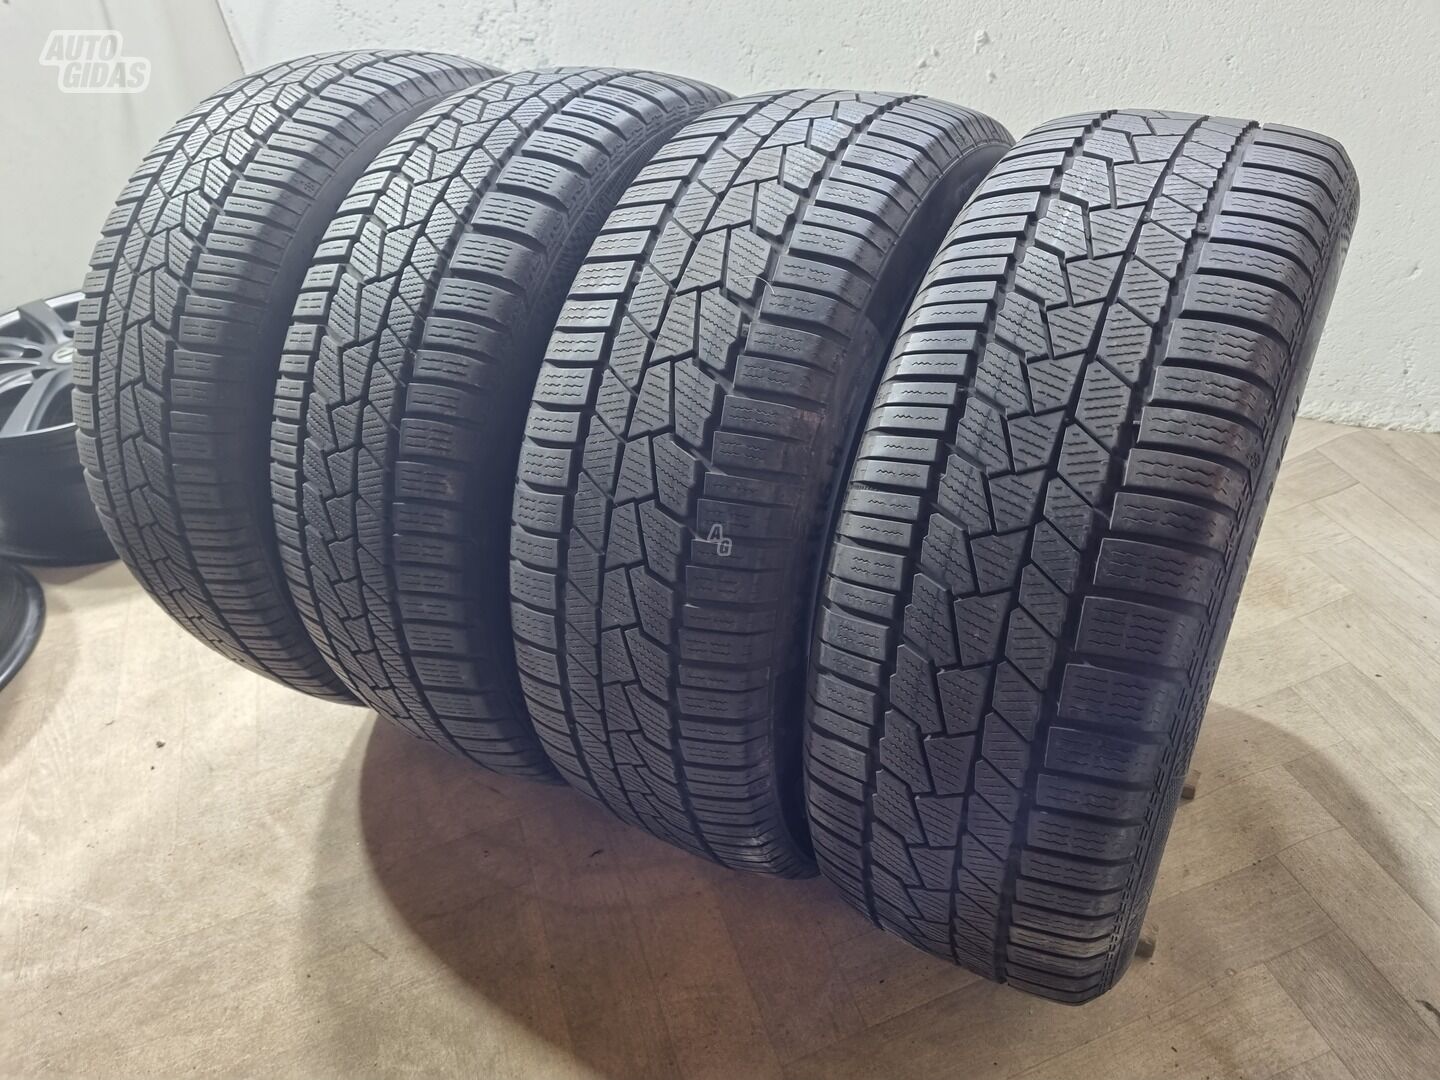 Continental 6mm, 2019m R16 universal tyres passanger car